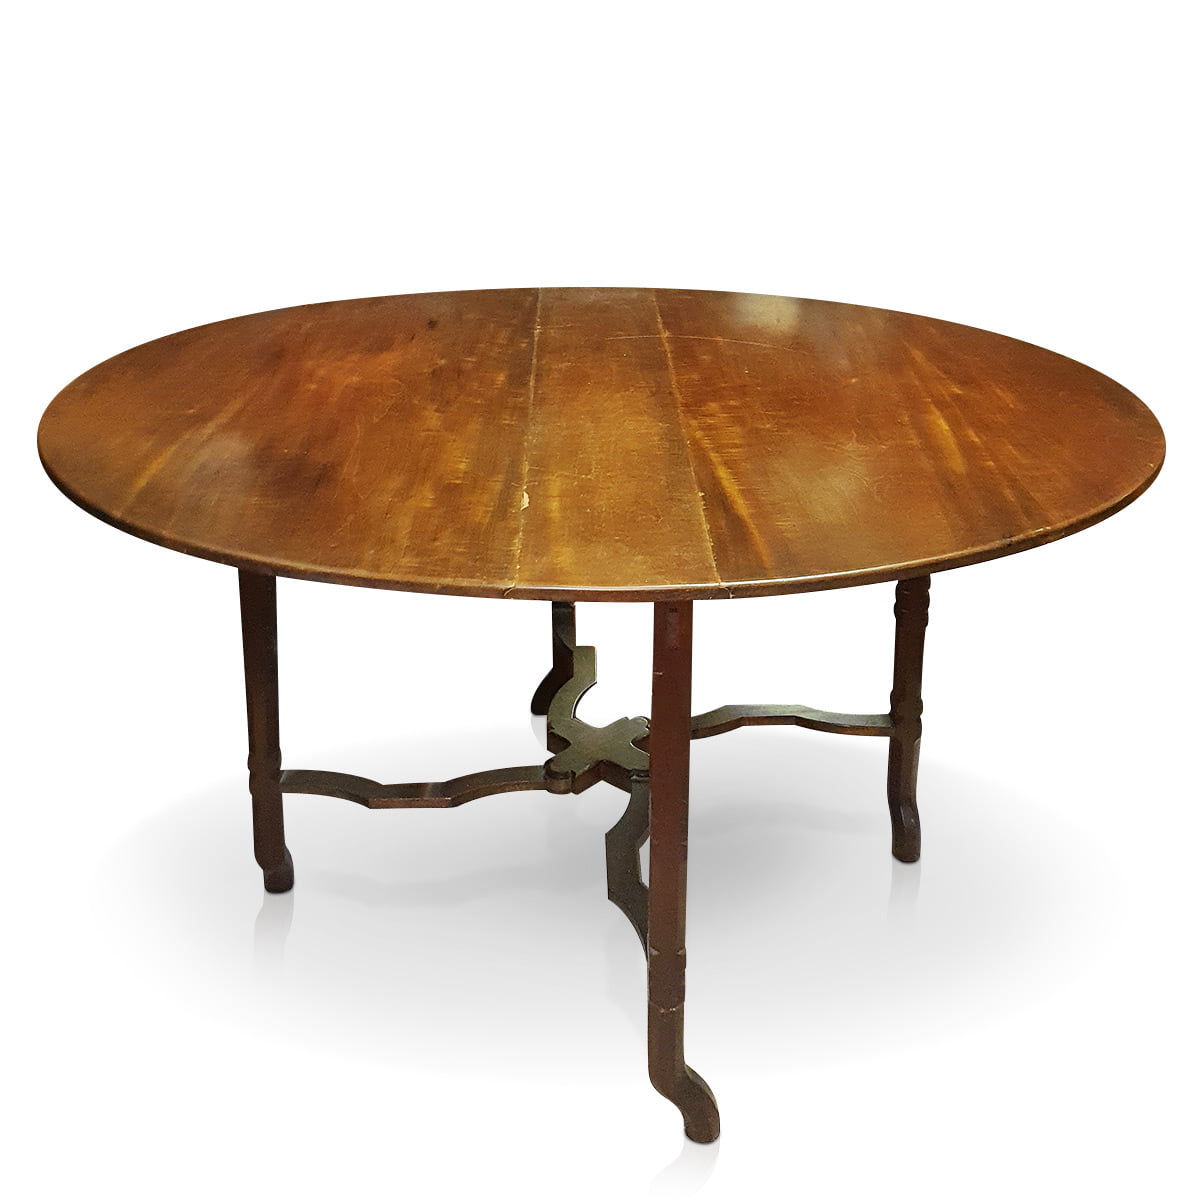 Arts and Crafts Movement Oval Gateleg Table